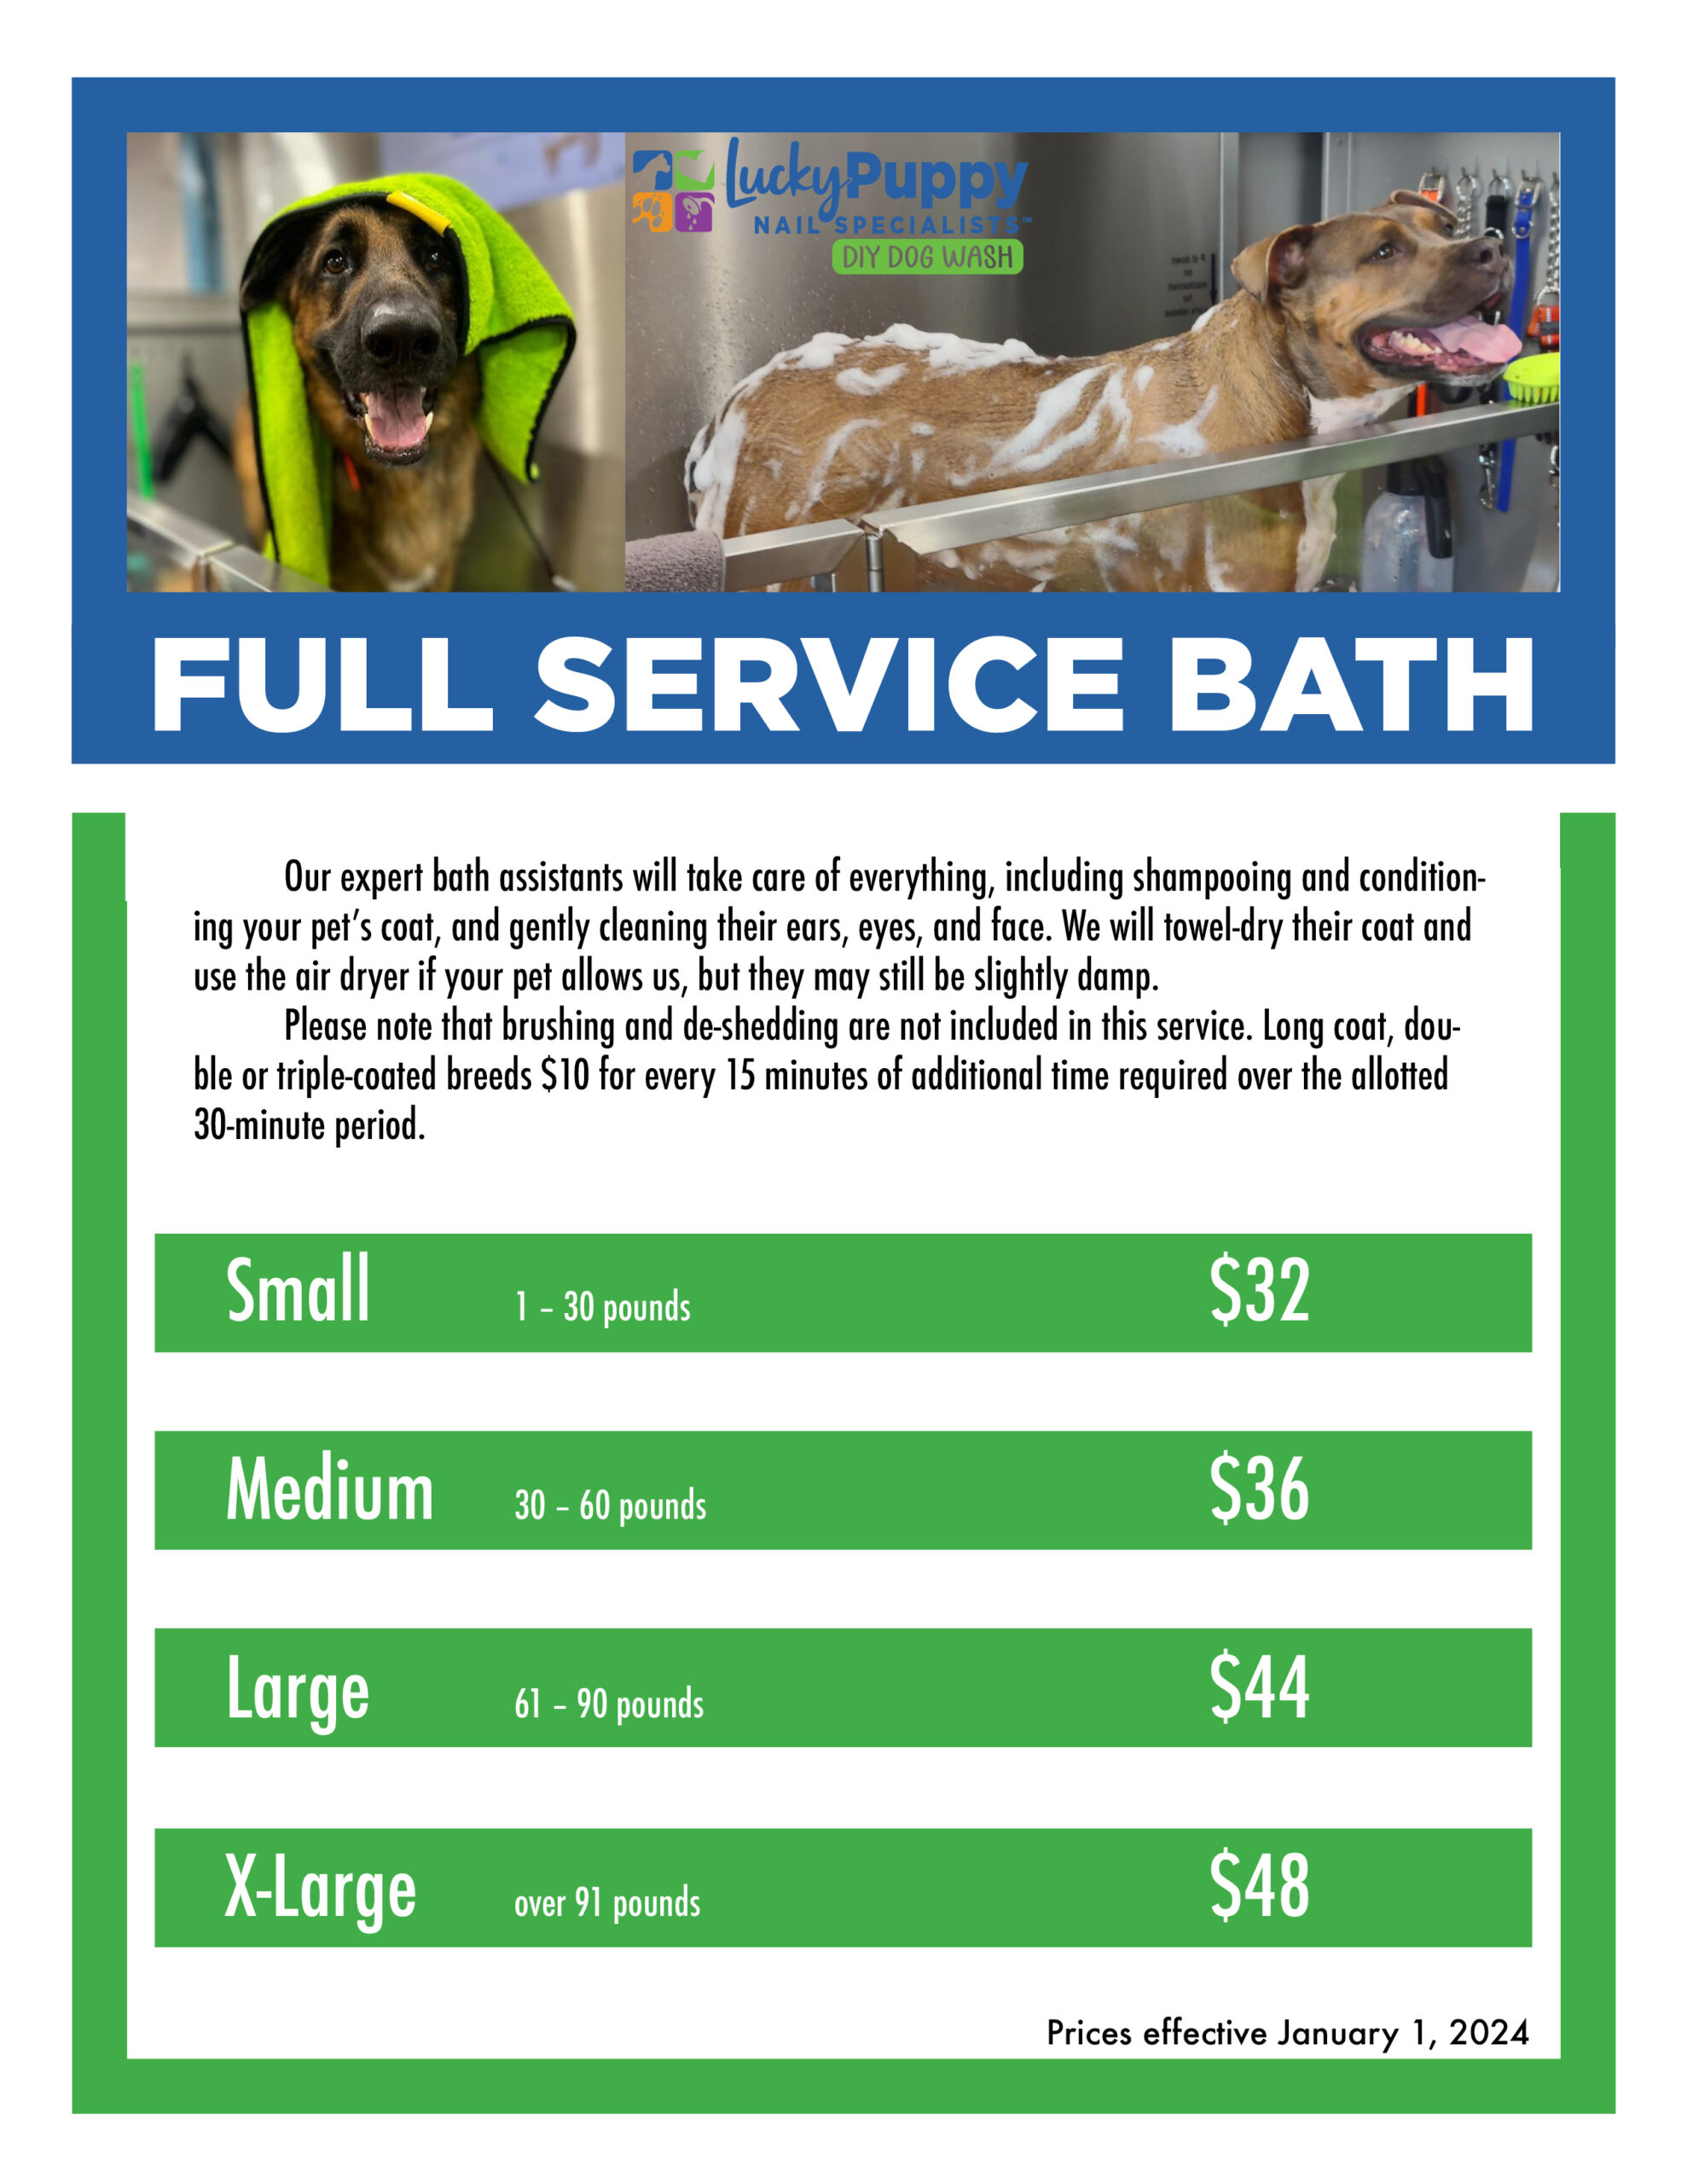 Lucky Puppy Nail Specialists Full Service Bath Prices